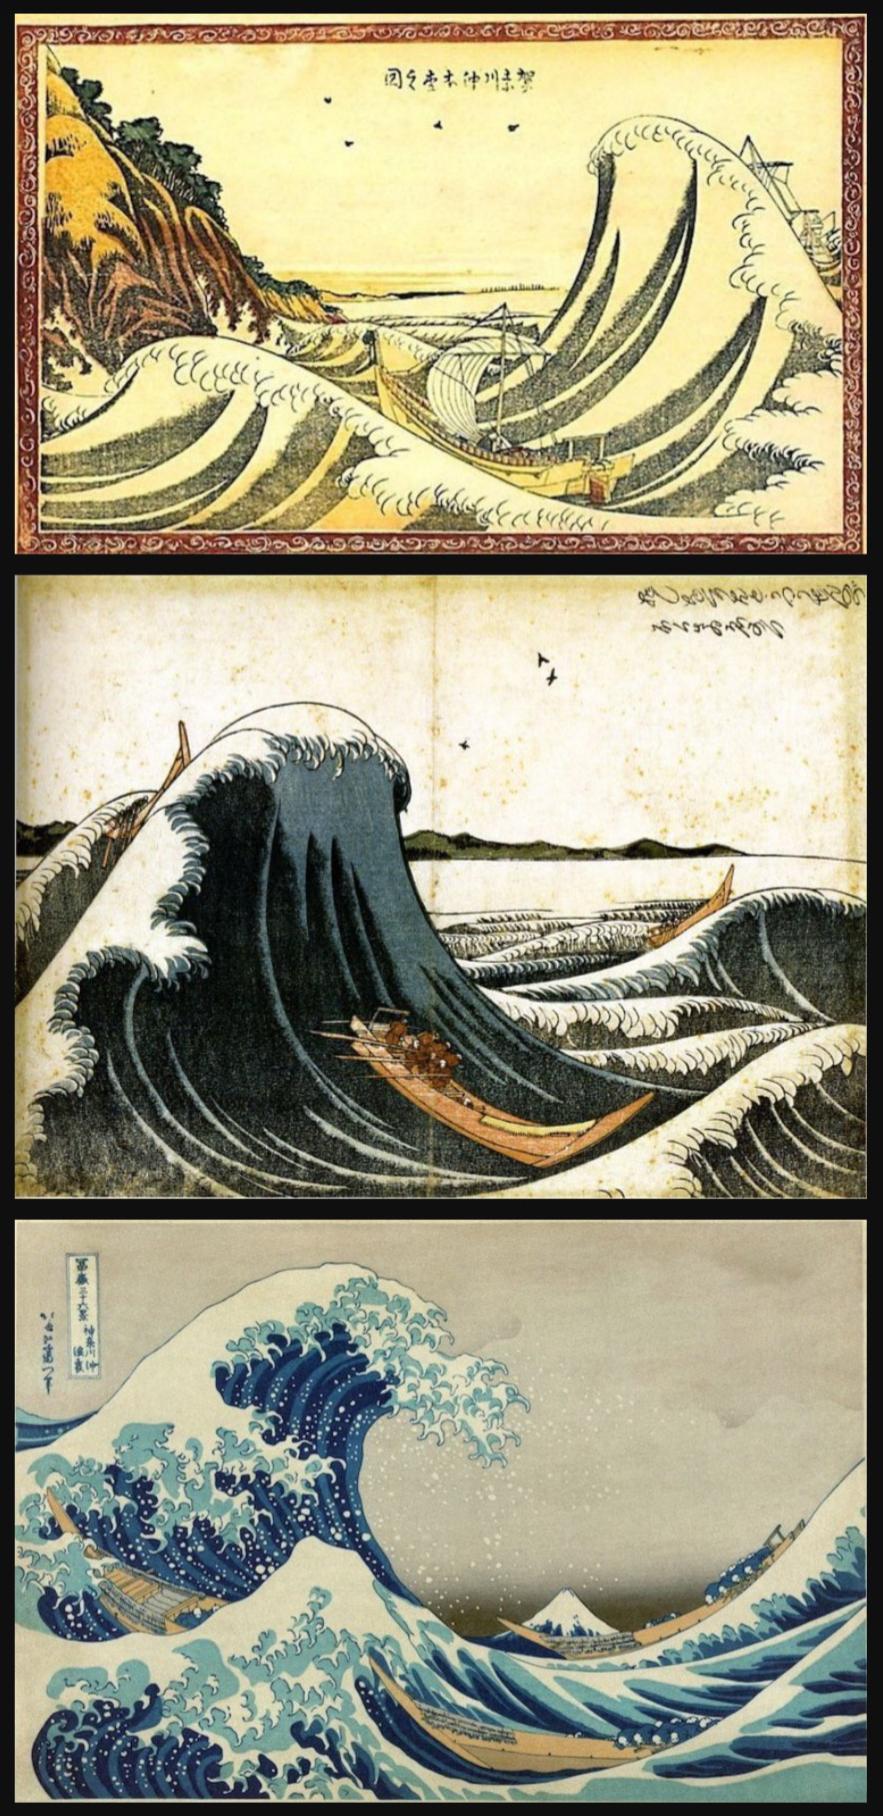 Waves by ukiyoe master Hokusai at 44, 46, and 72 years of age, respectively.jpg